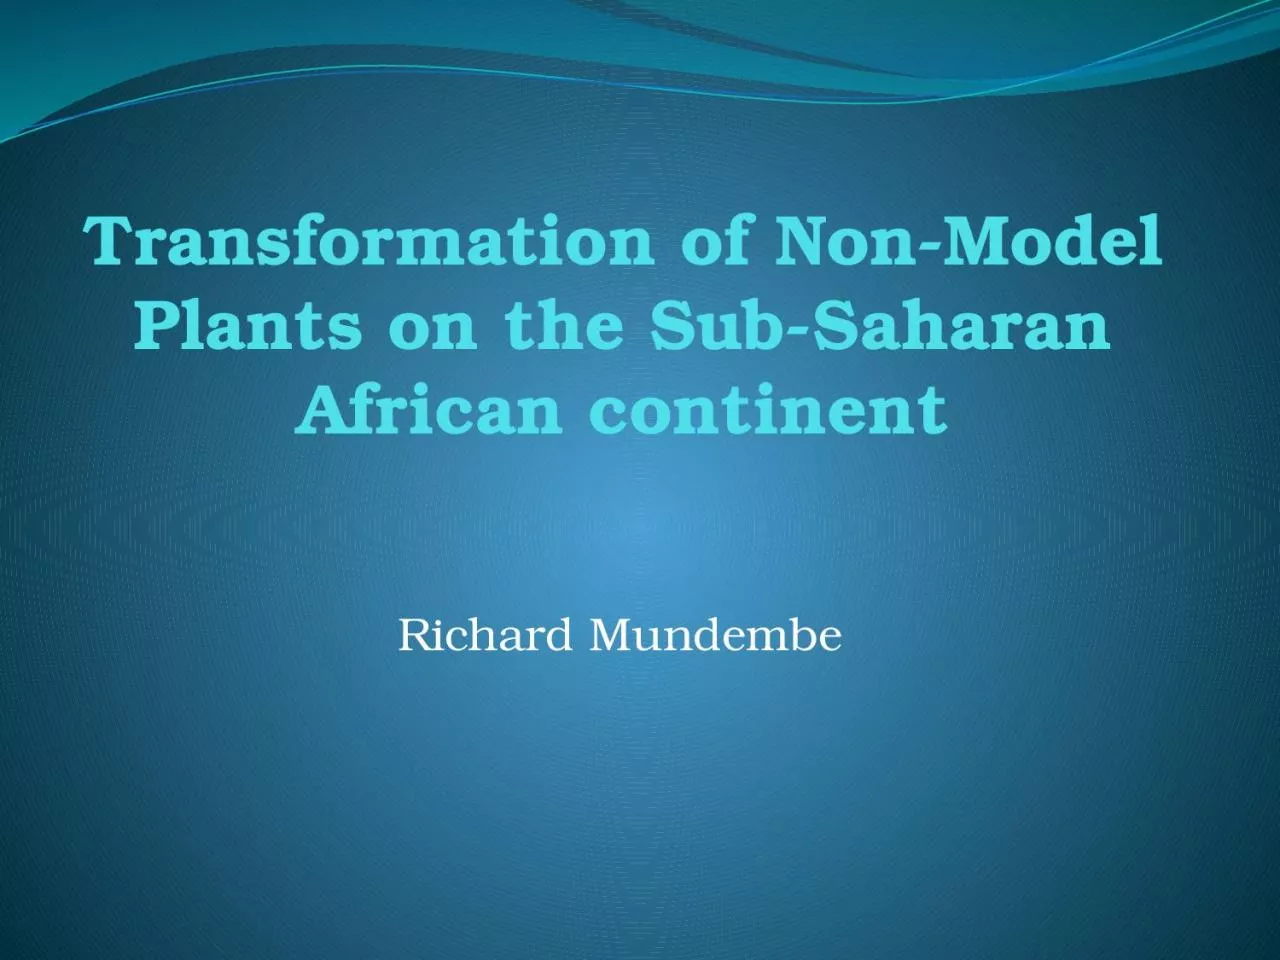 Transformation of Non-Model Plants on the Sub-Saharan African continent